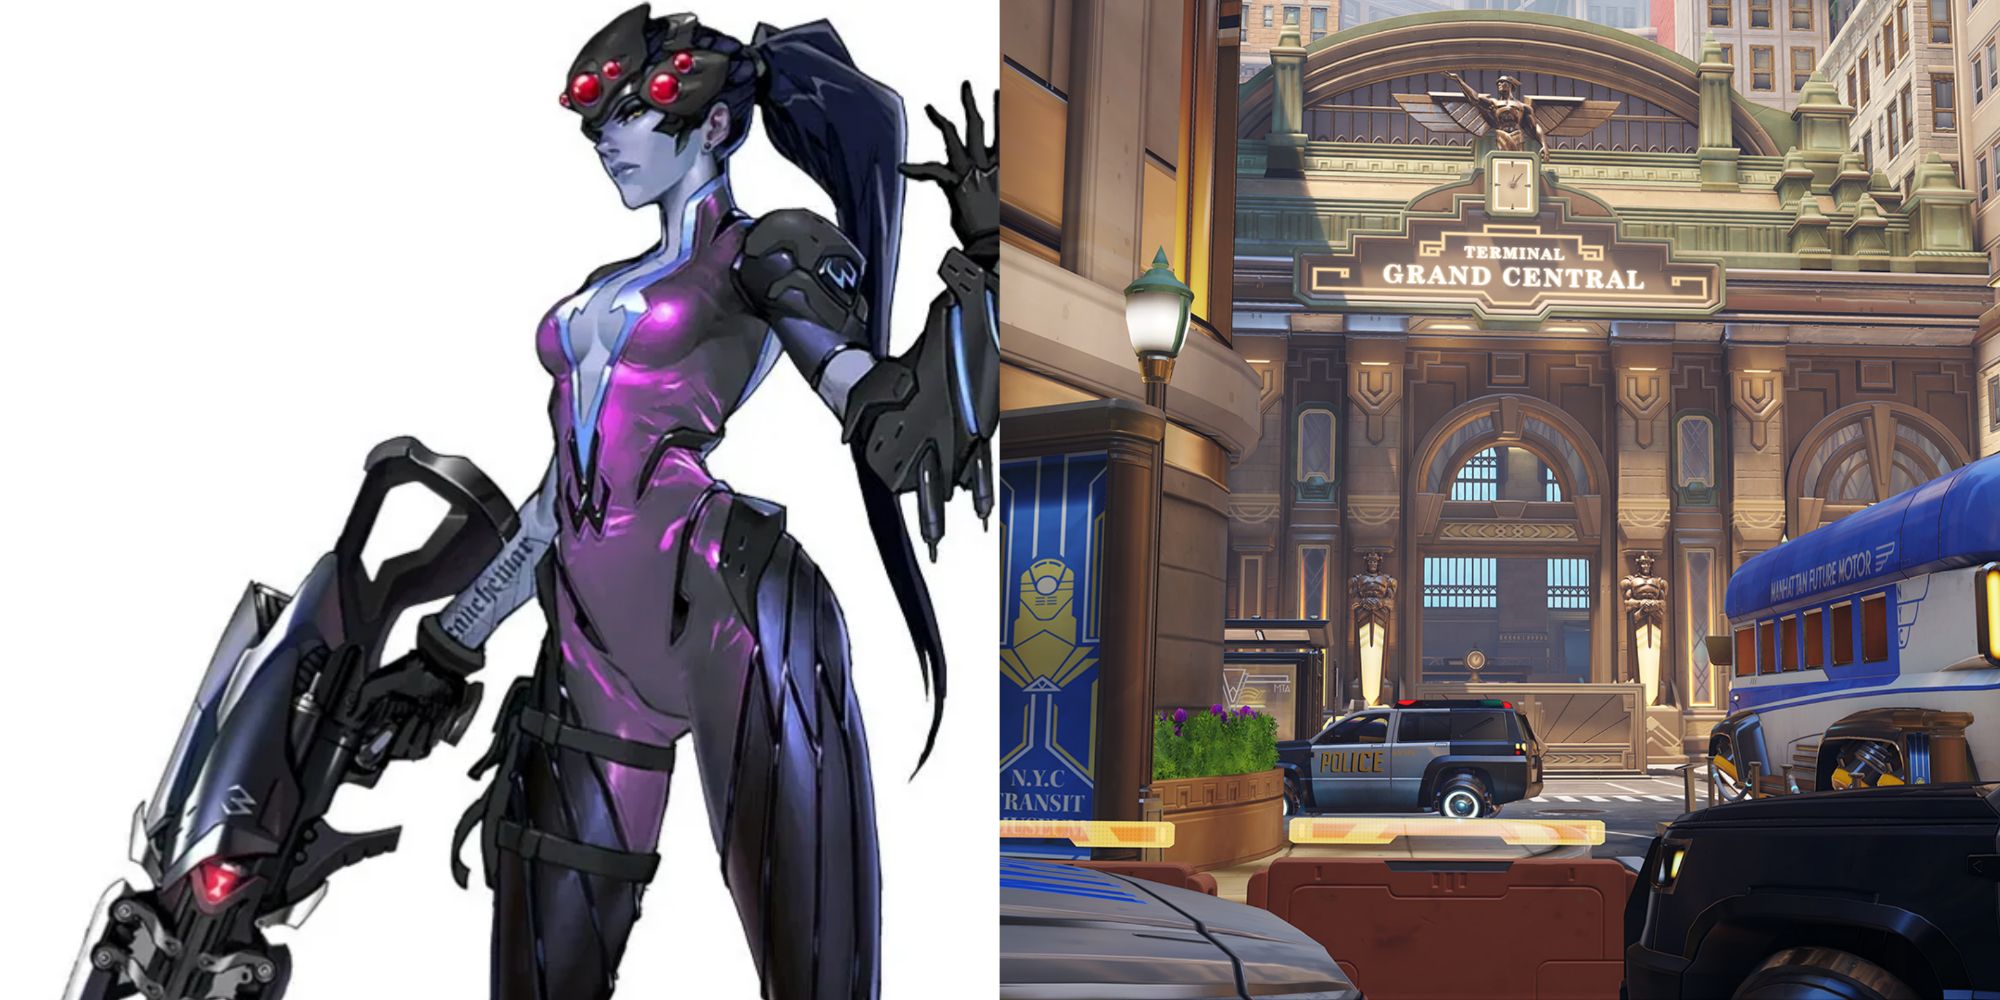 How To Play As Widowmaker In Overwatch 2